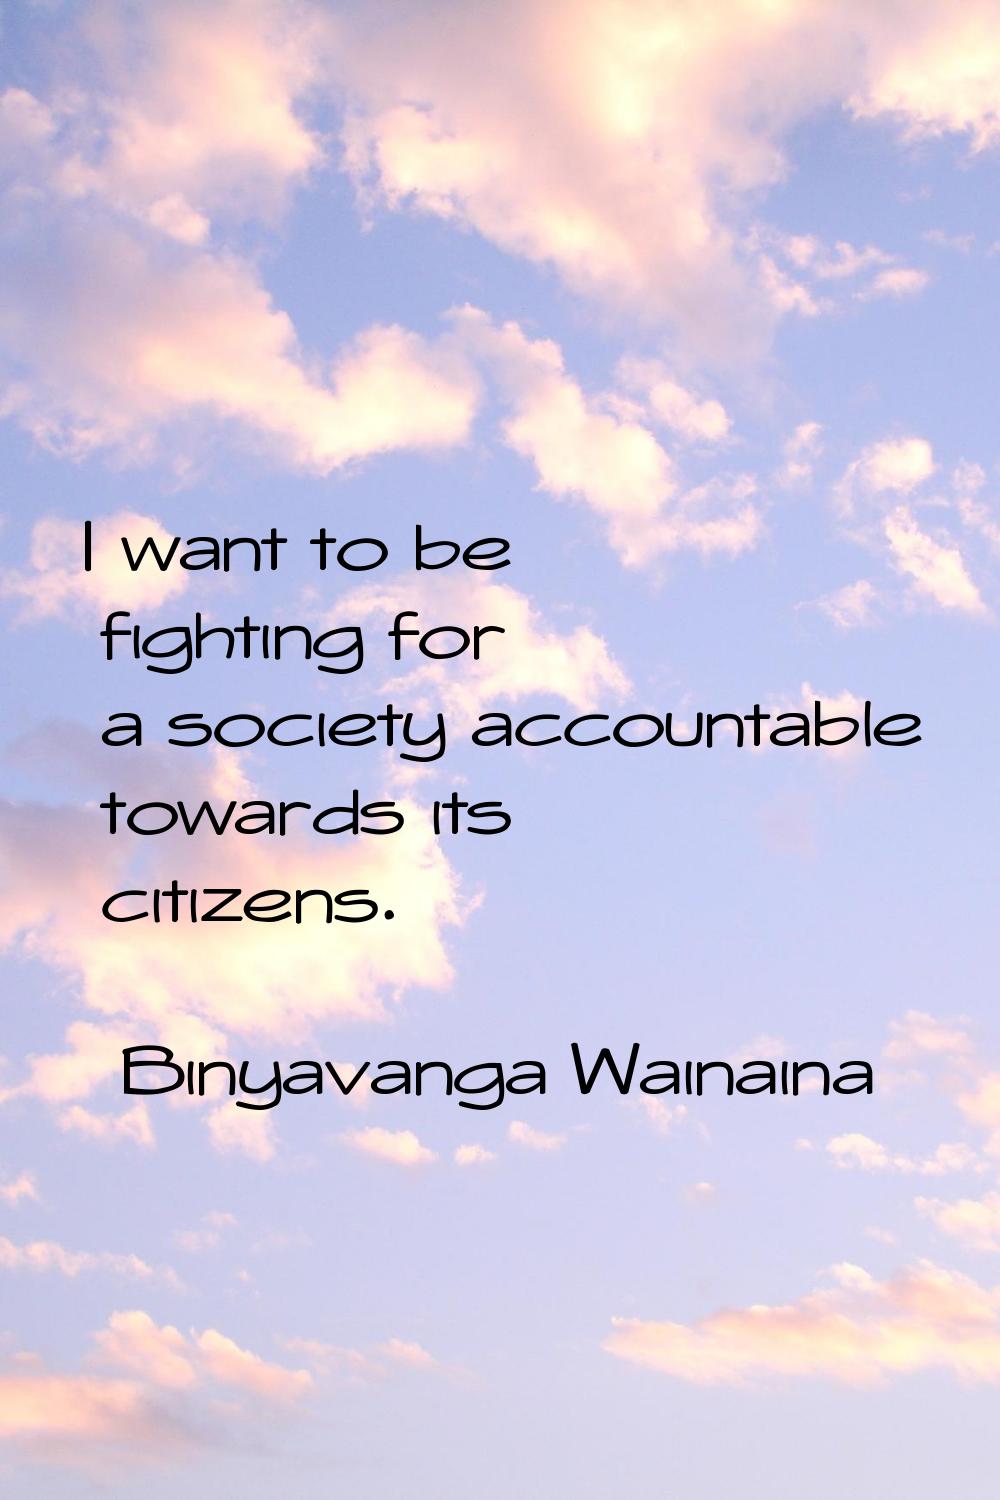 I want to be fighting for a society accountable towards its citizens.